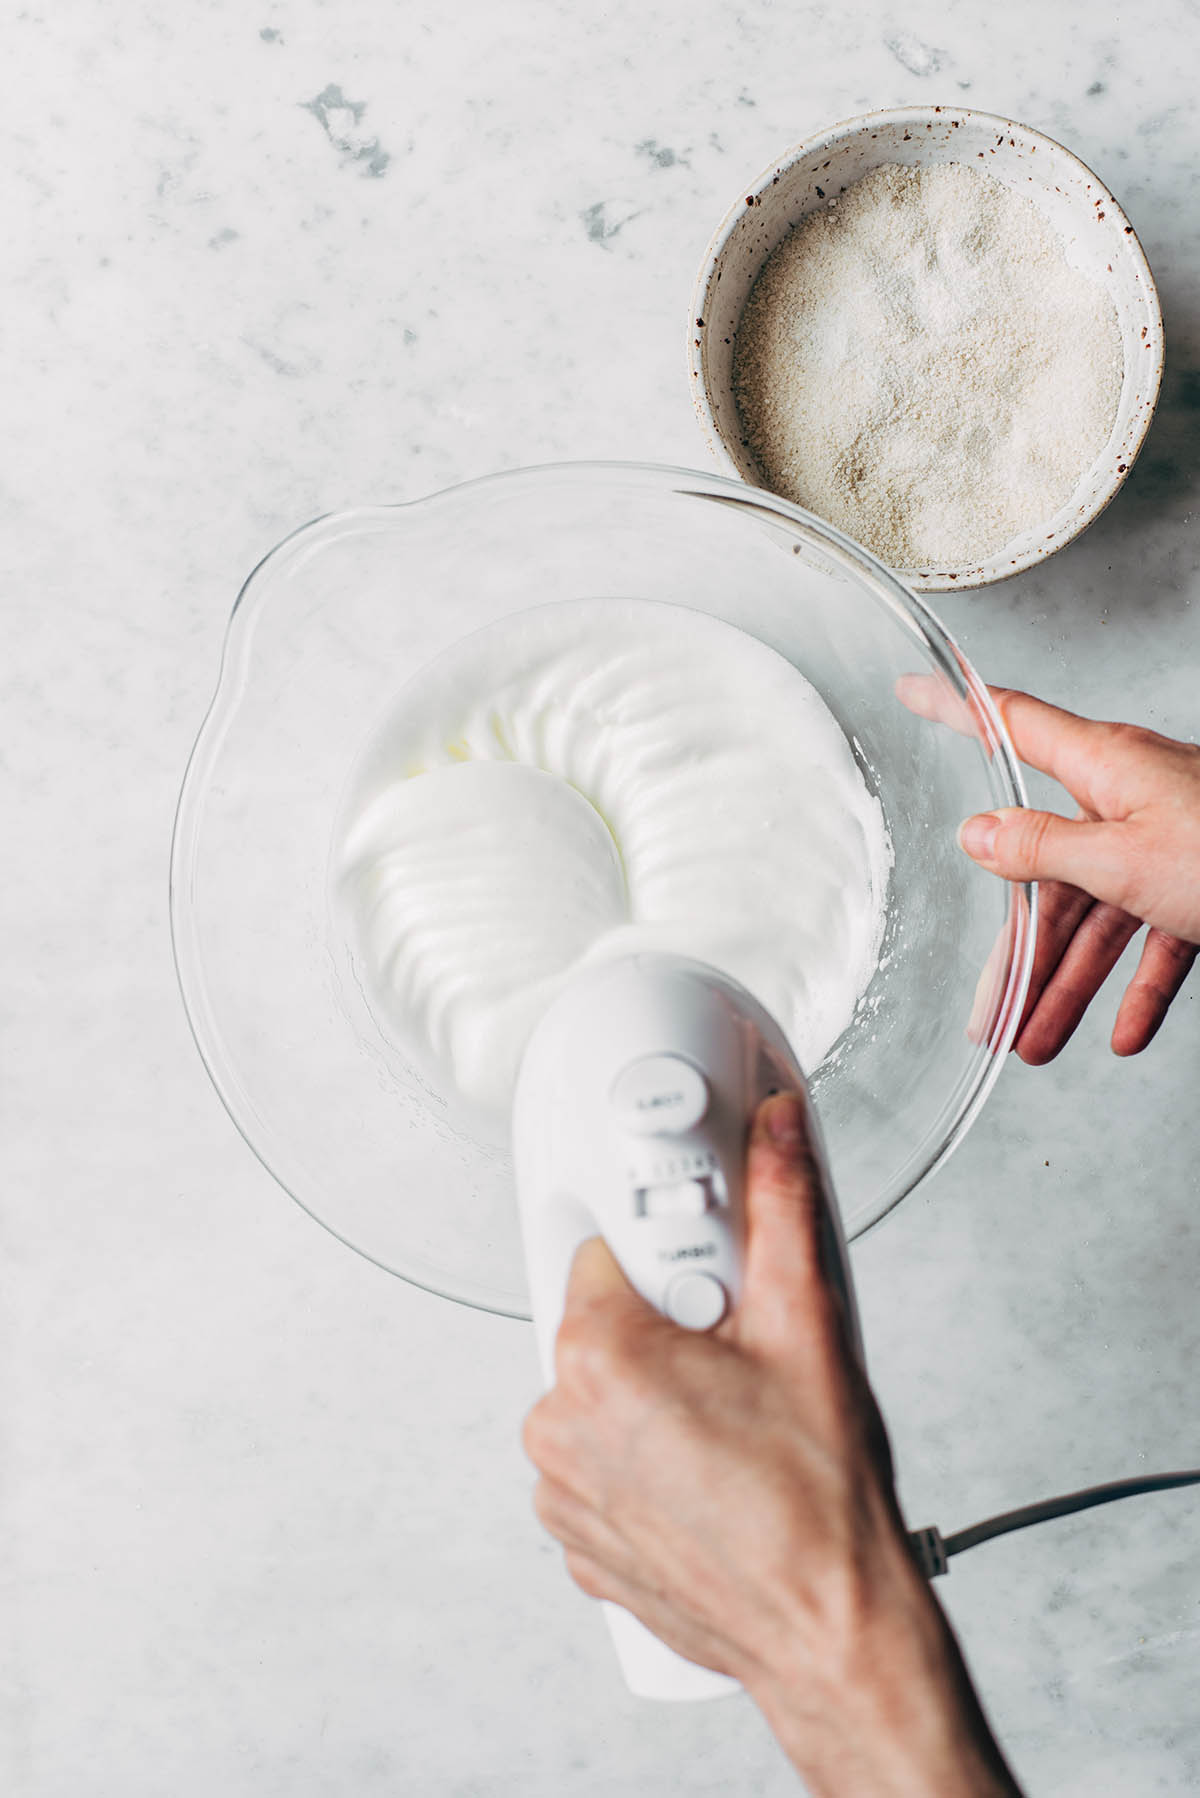 Hands using a hand mixer to whip meringue.